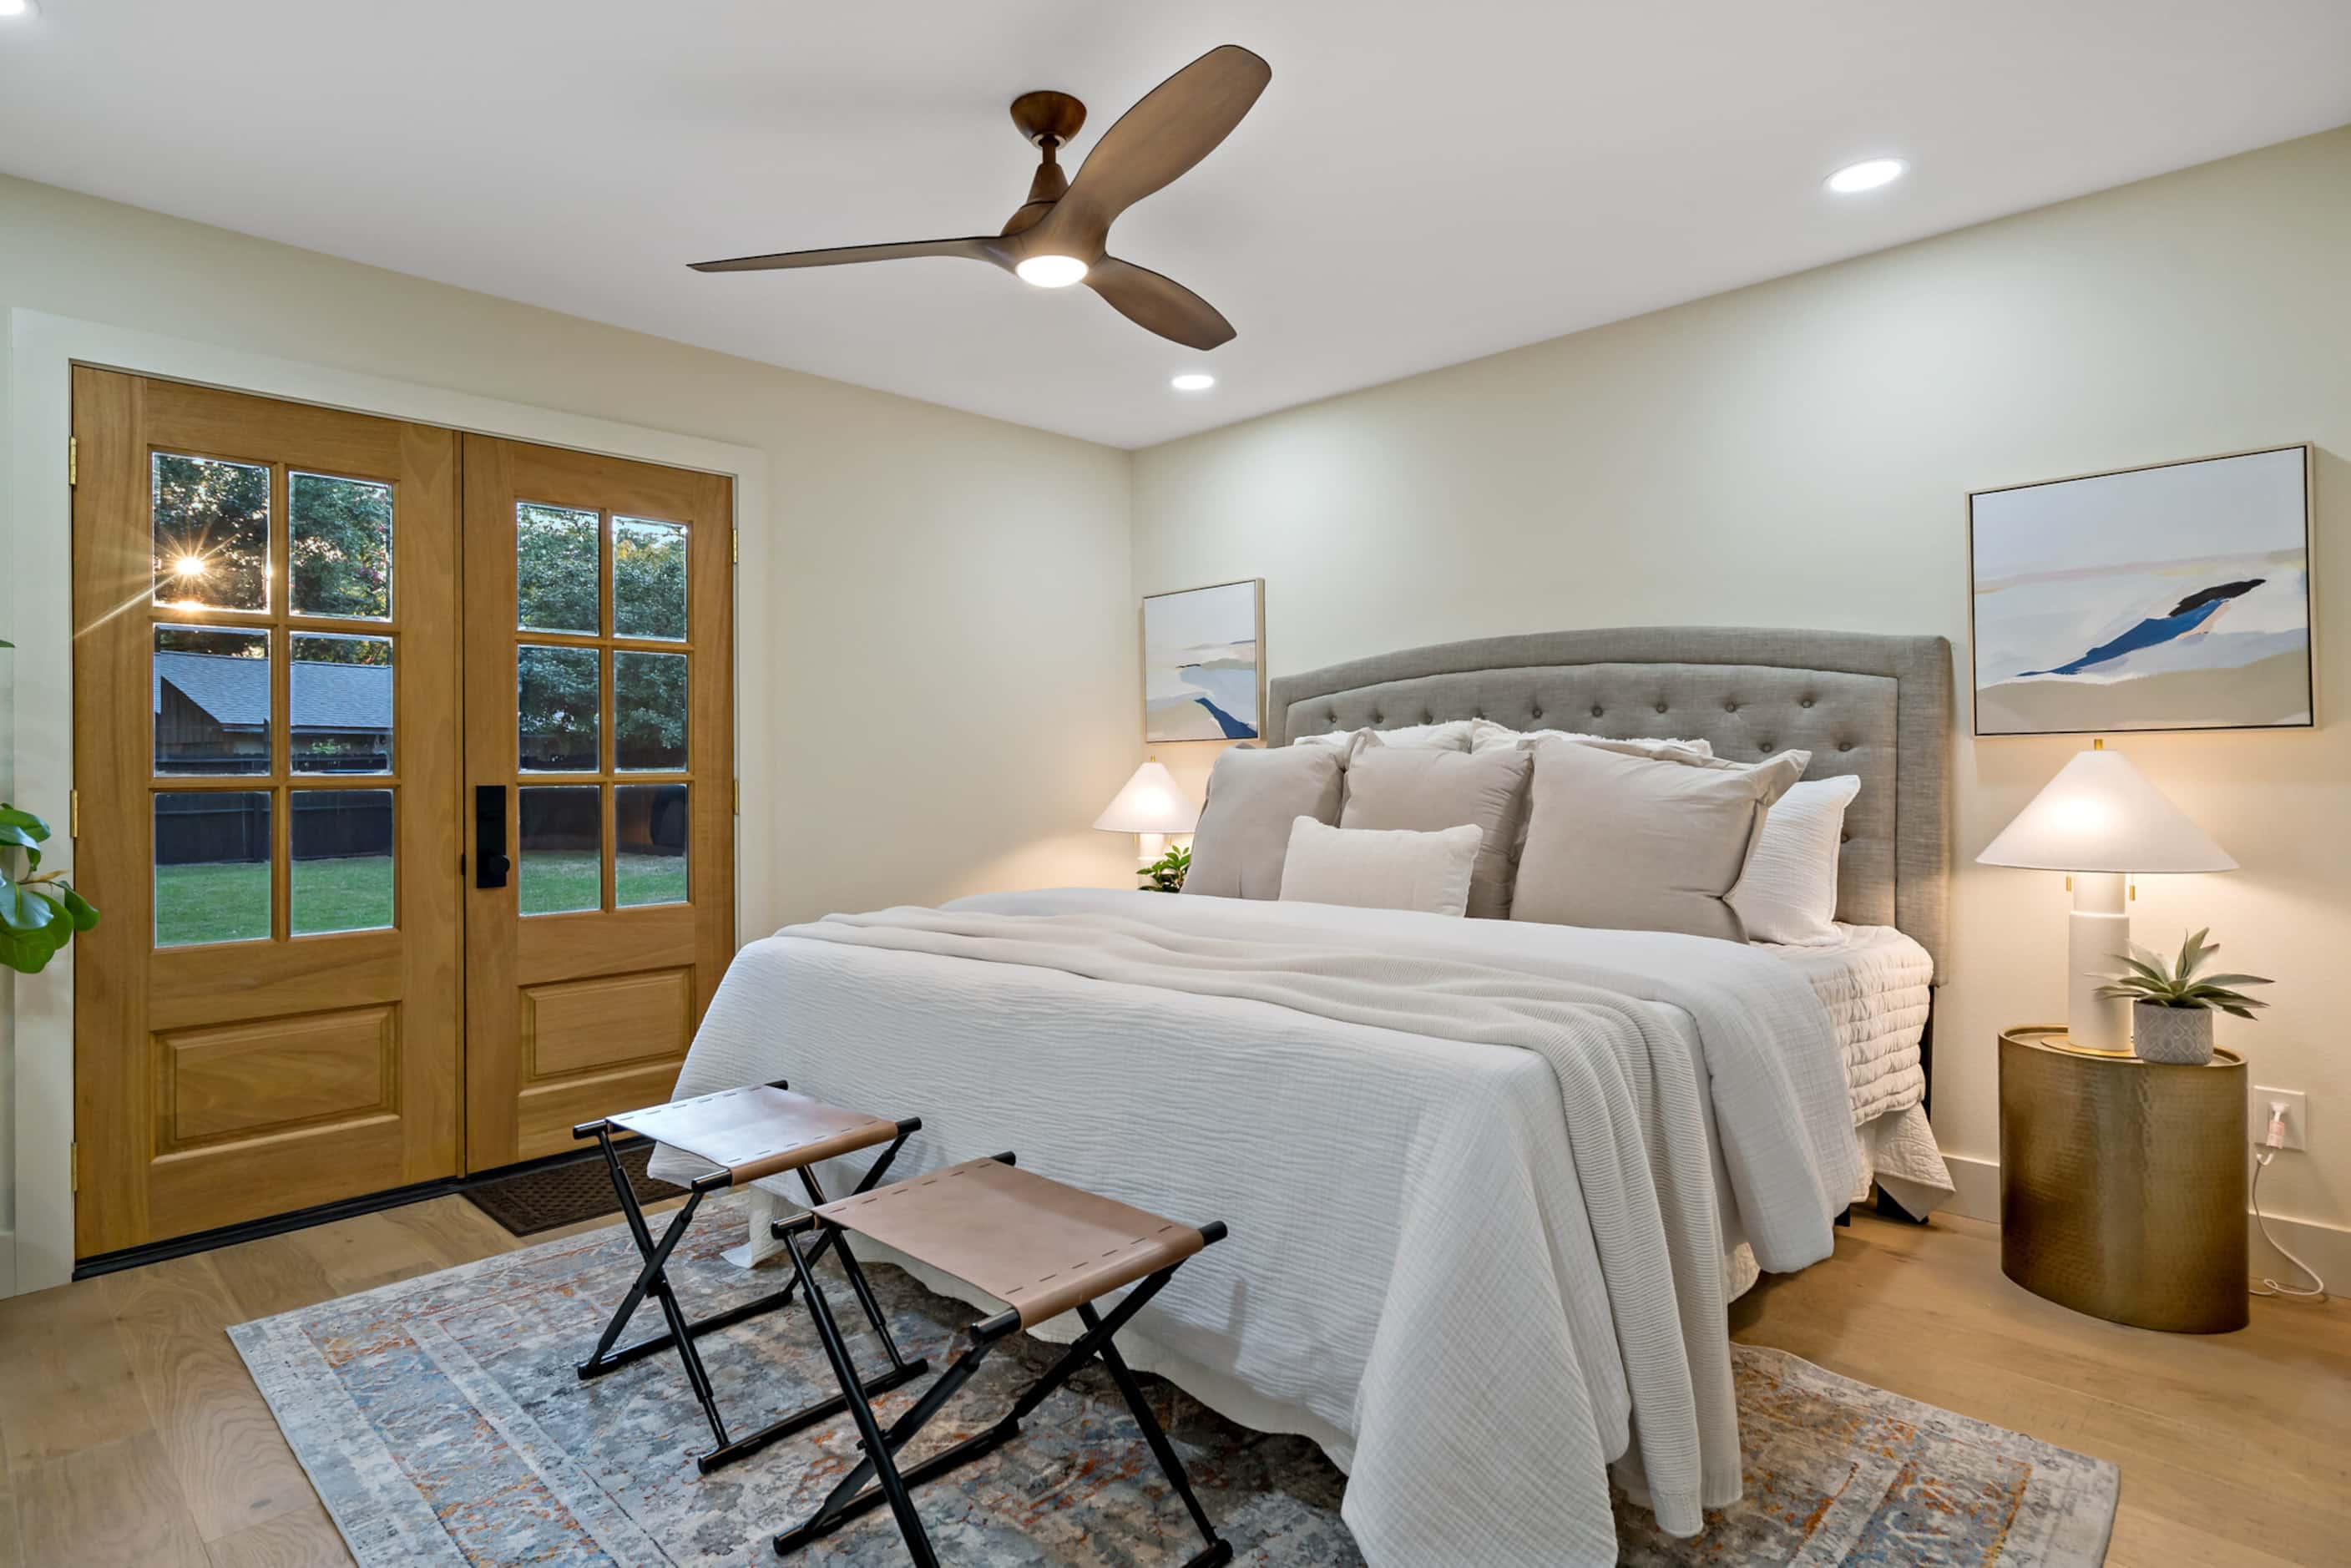 Bedroom with large bed, door to backyard patio, folding stools at end of bed